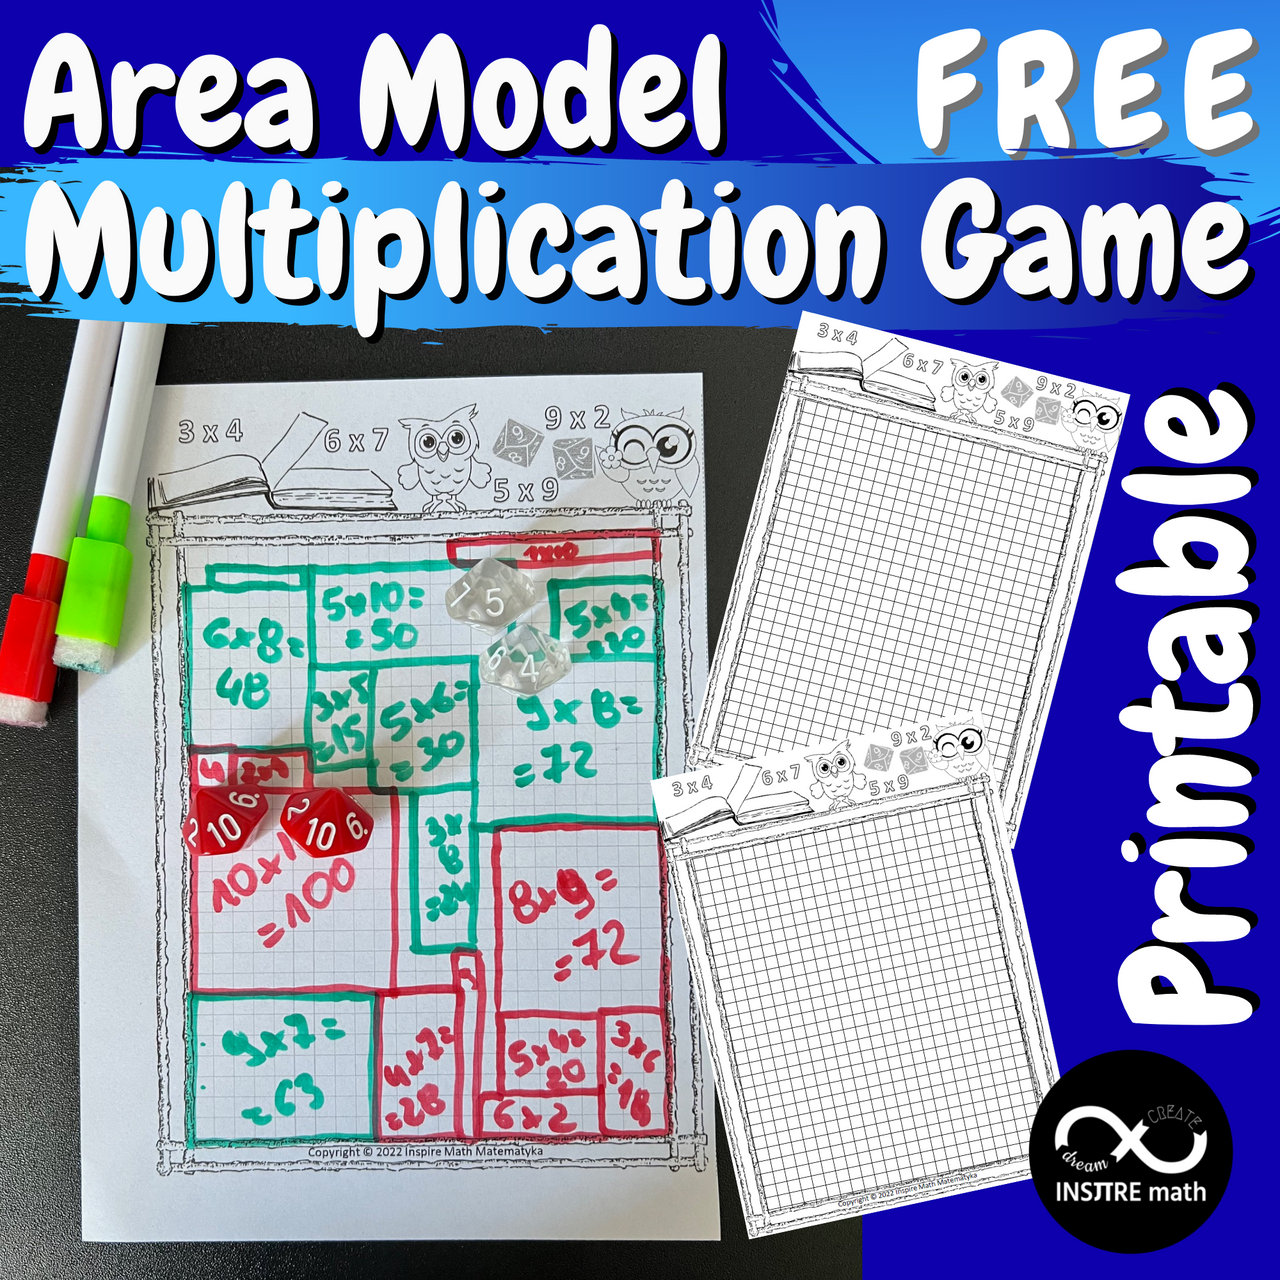 FREE Area Model Multiplication Game Multiplication Facts Arrays Dice Game Print